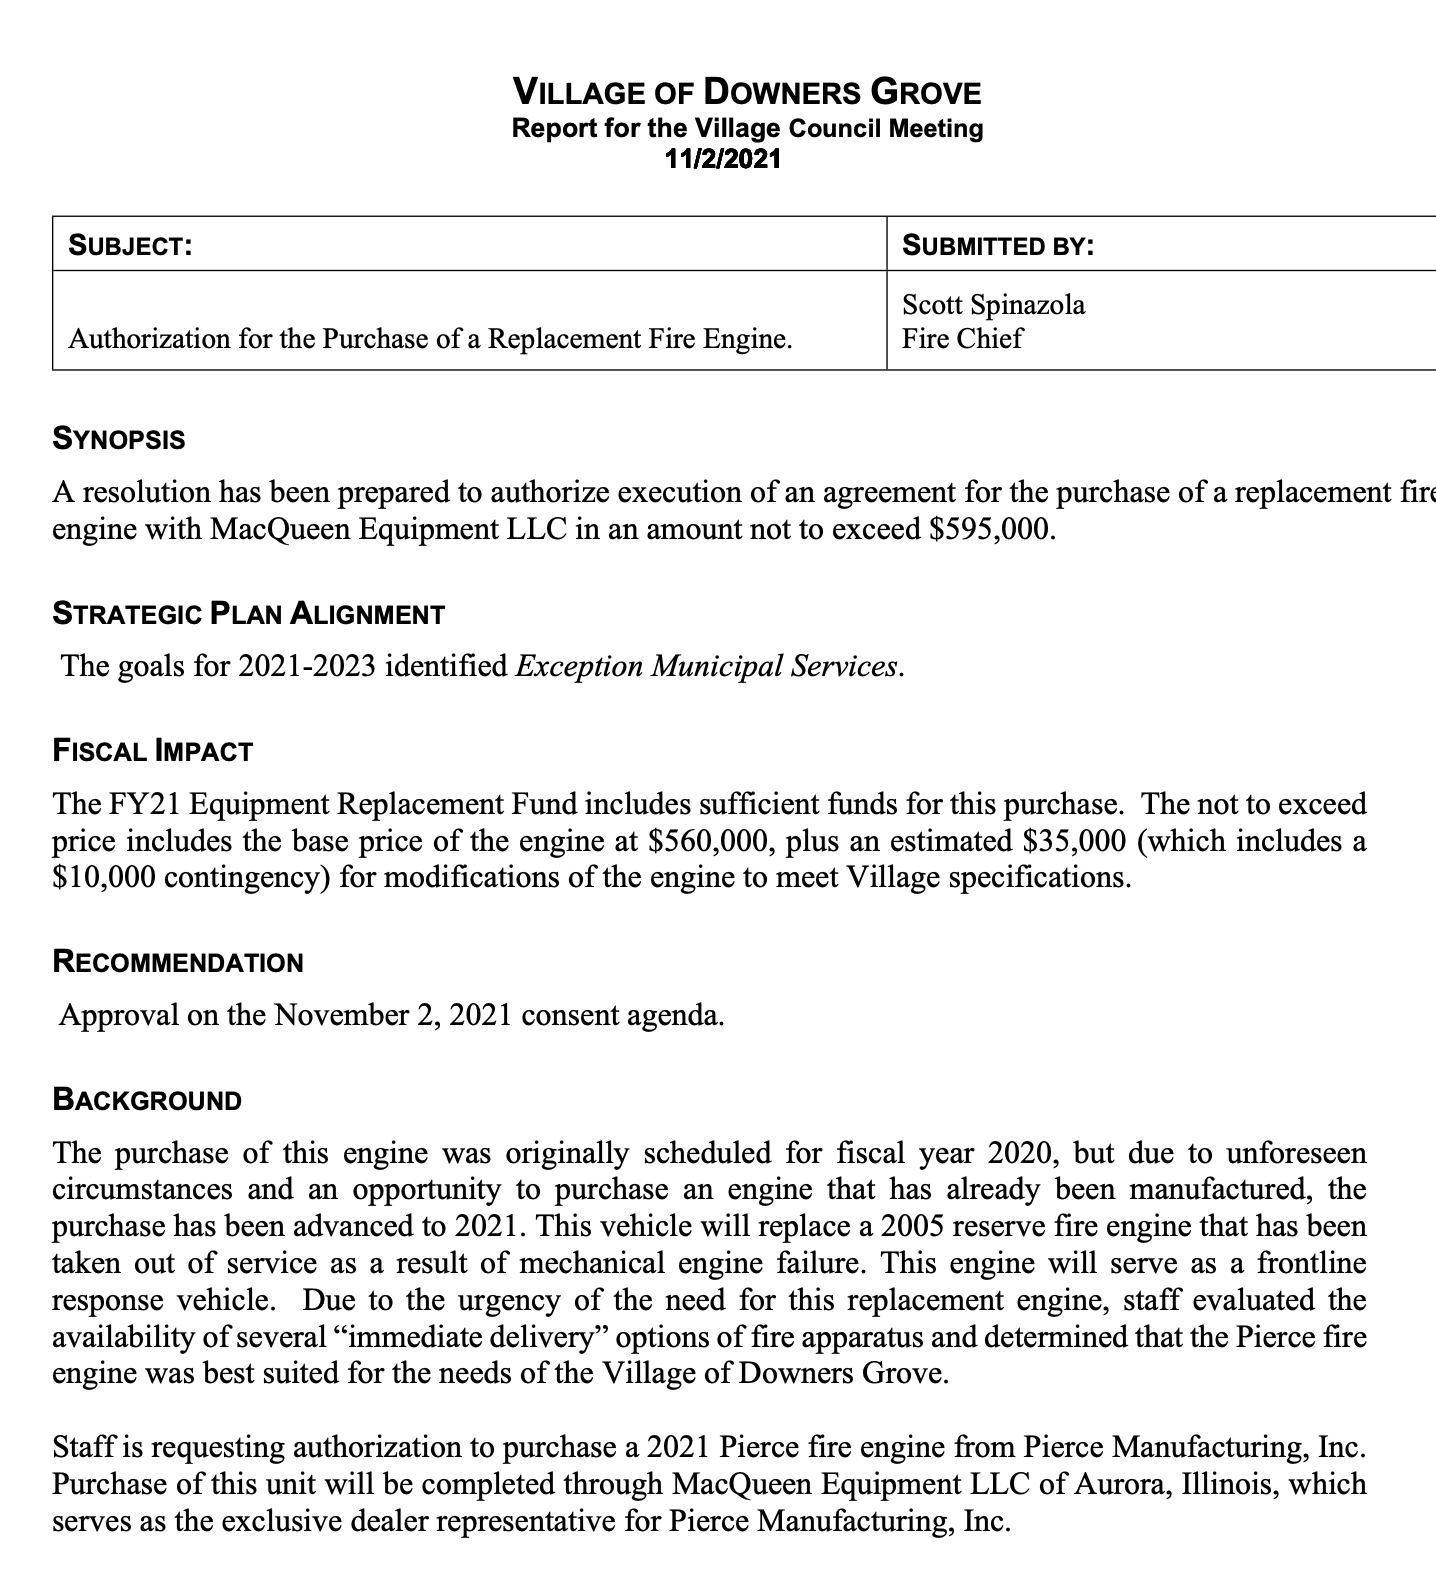 Village of Downers Grove 11-2-21 agenda minutes to purchase Pierce fire engine